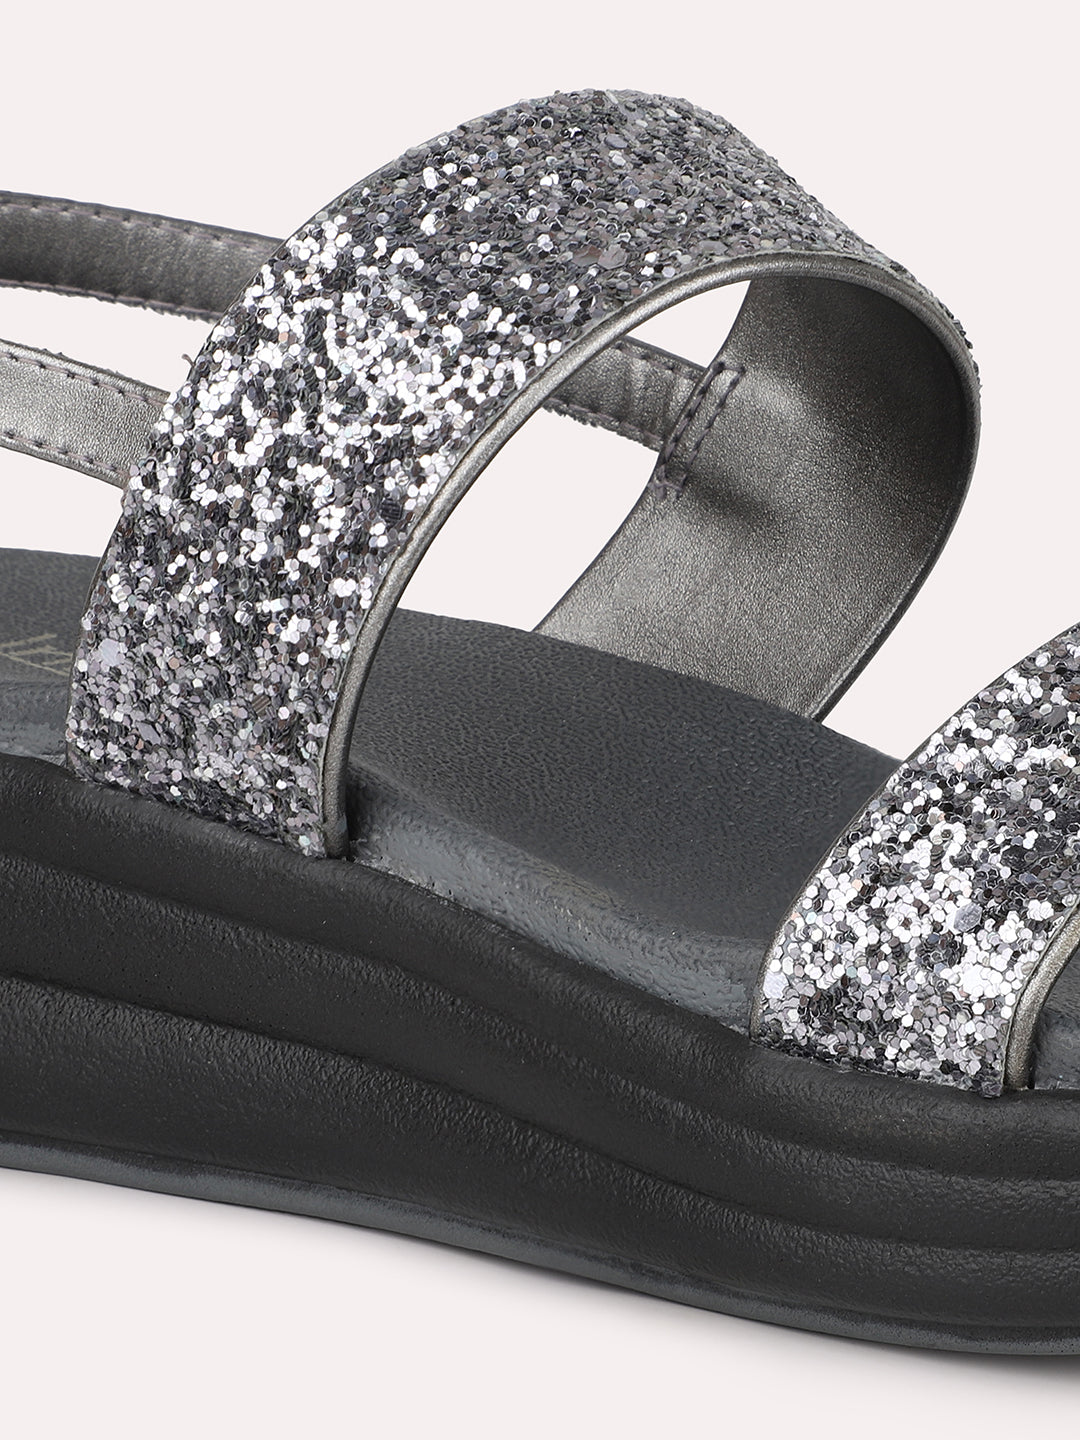 Women Pewter Embellished Open Toe Comfort Sandals with Buckles